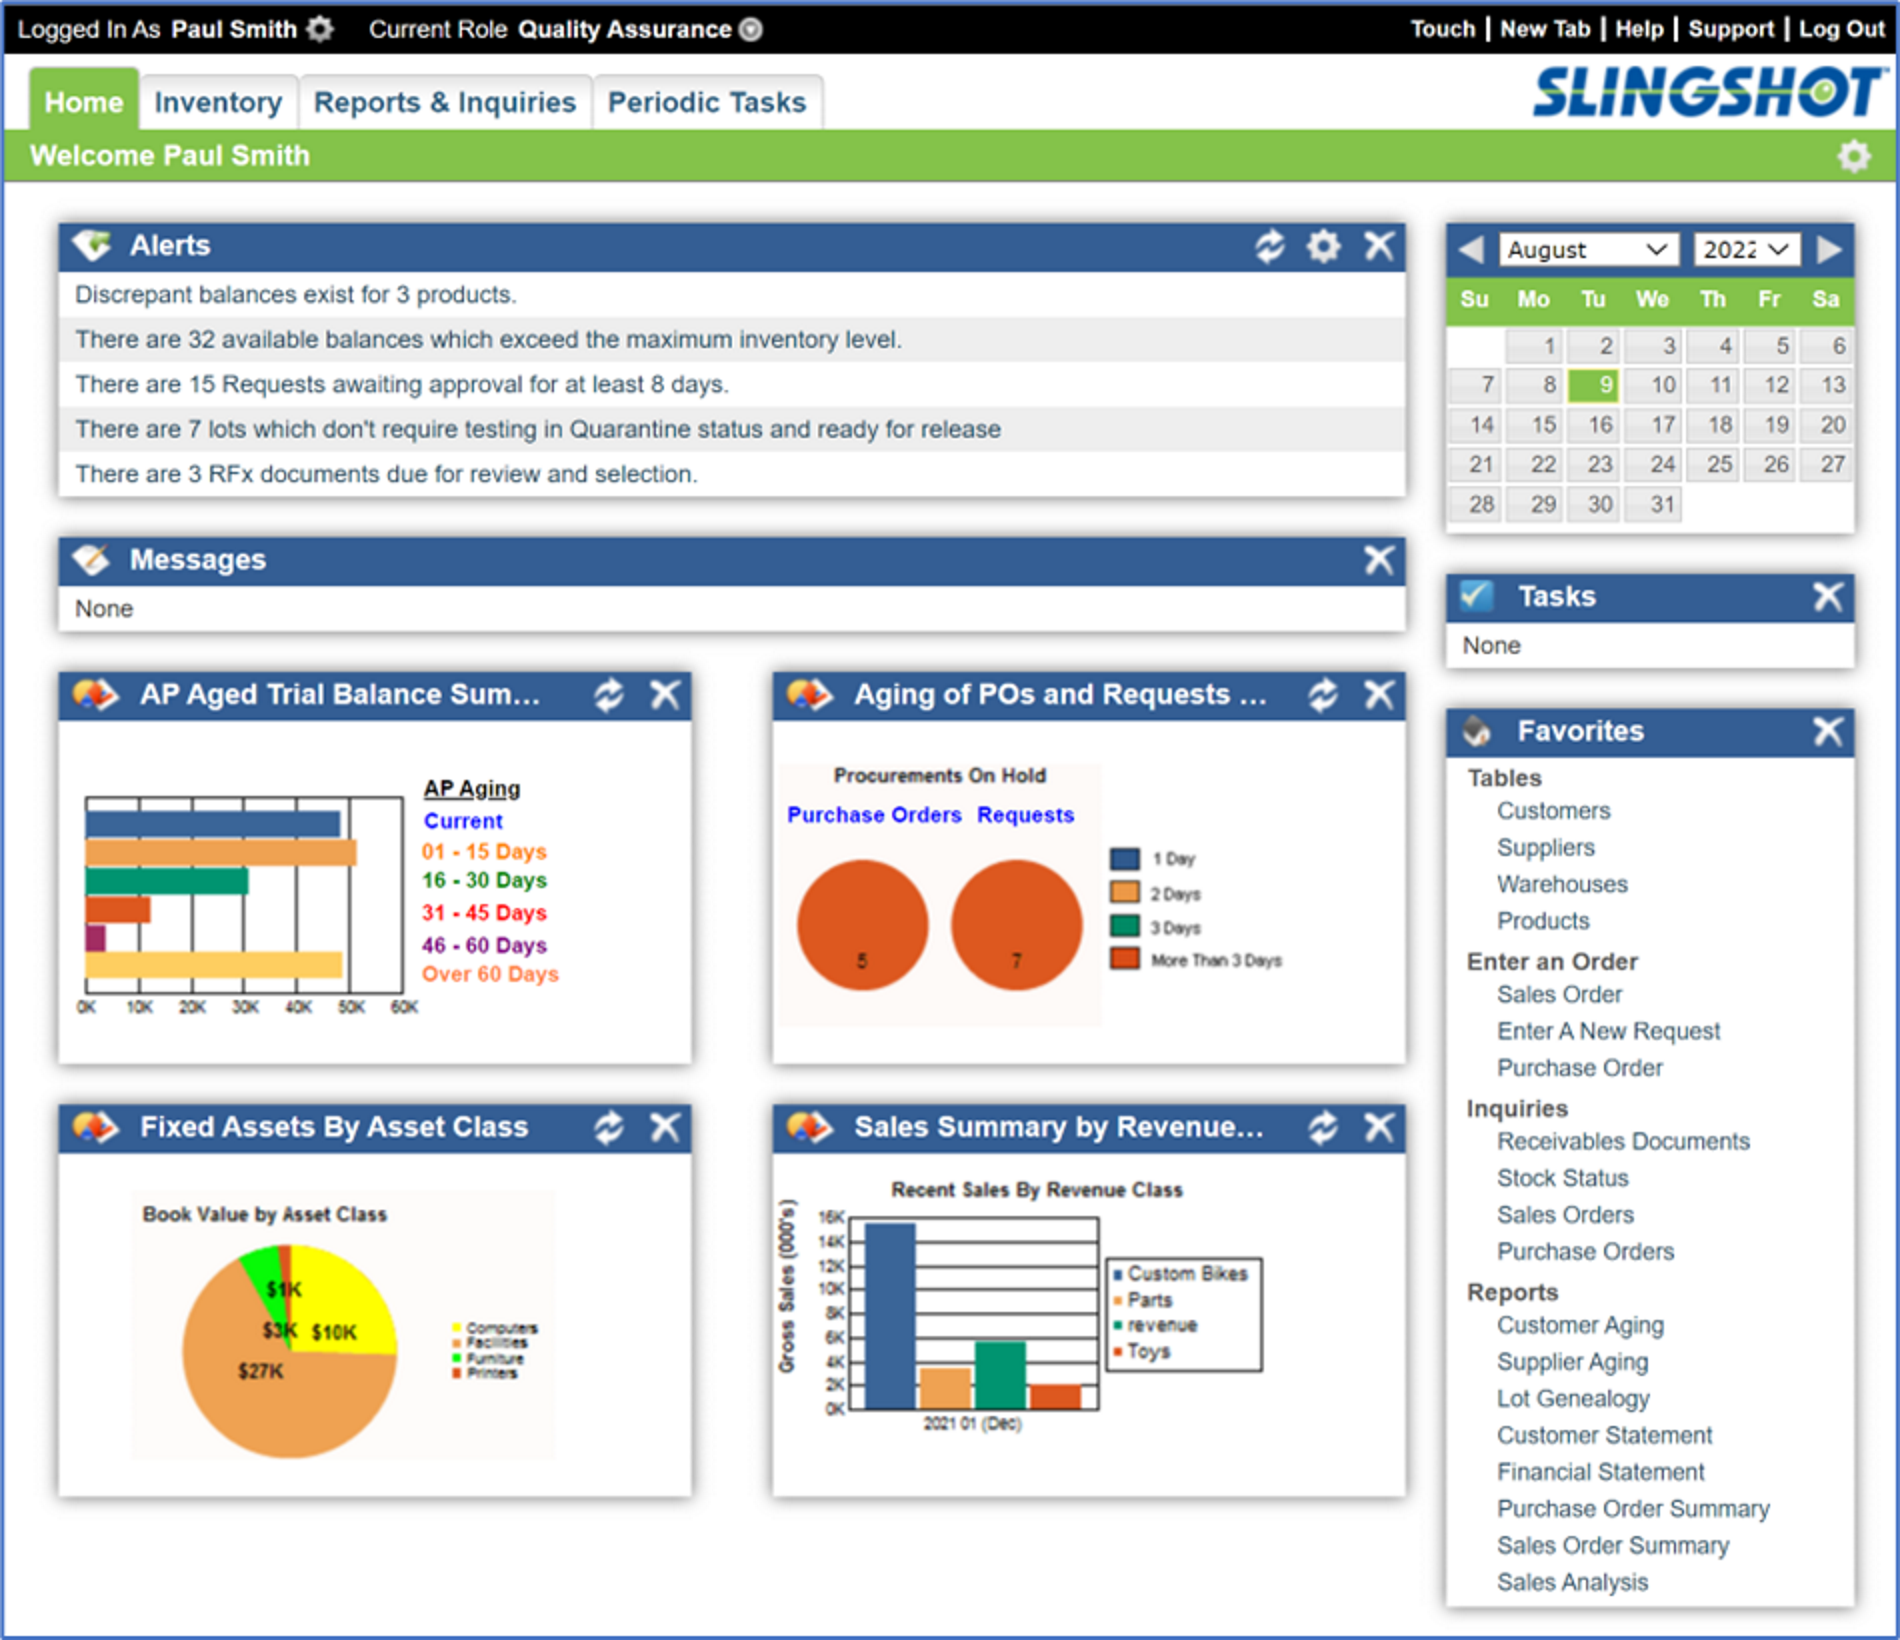 Dashboard configurable by user and role.